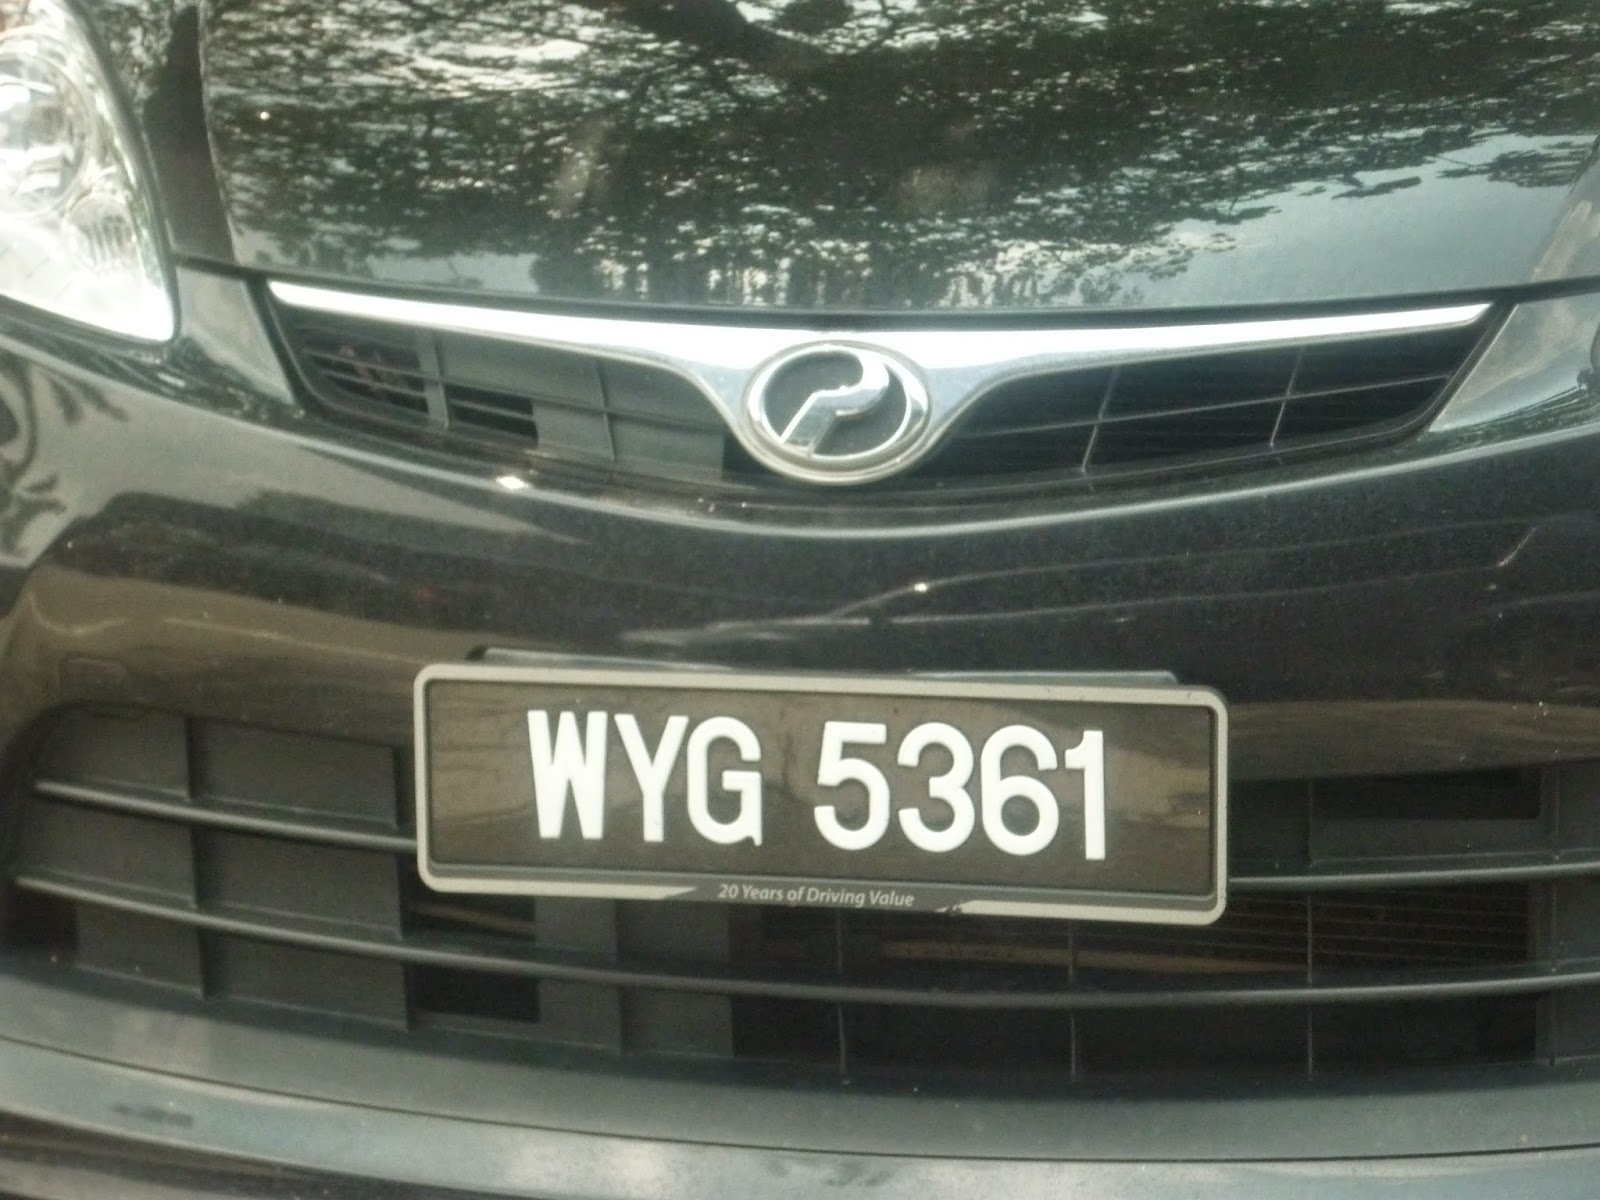 david 3816: JPJ to act on fancy number plate